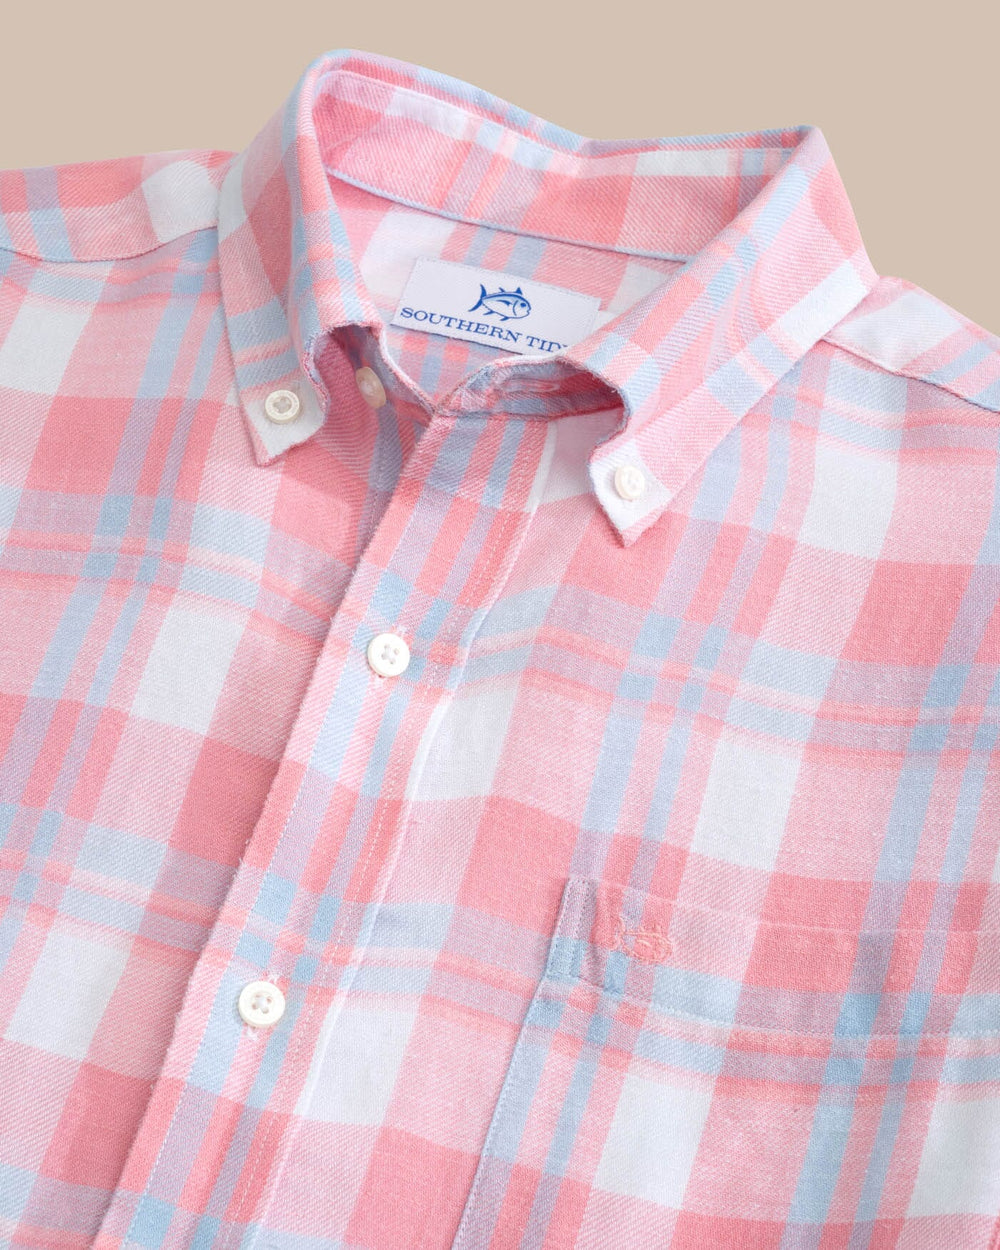 The detail view of the Southern Tide Headland Reedy Plaid Long Sleeve Sport Shirt by Southern Tide - Geranium Pink